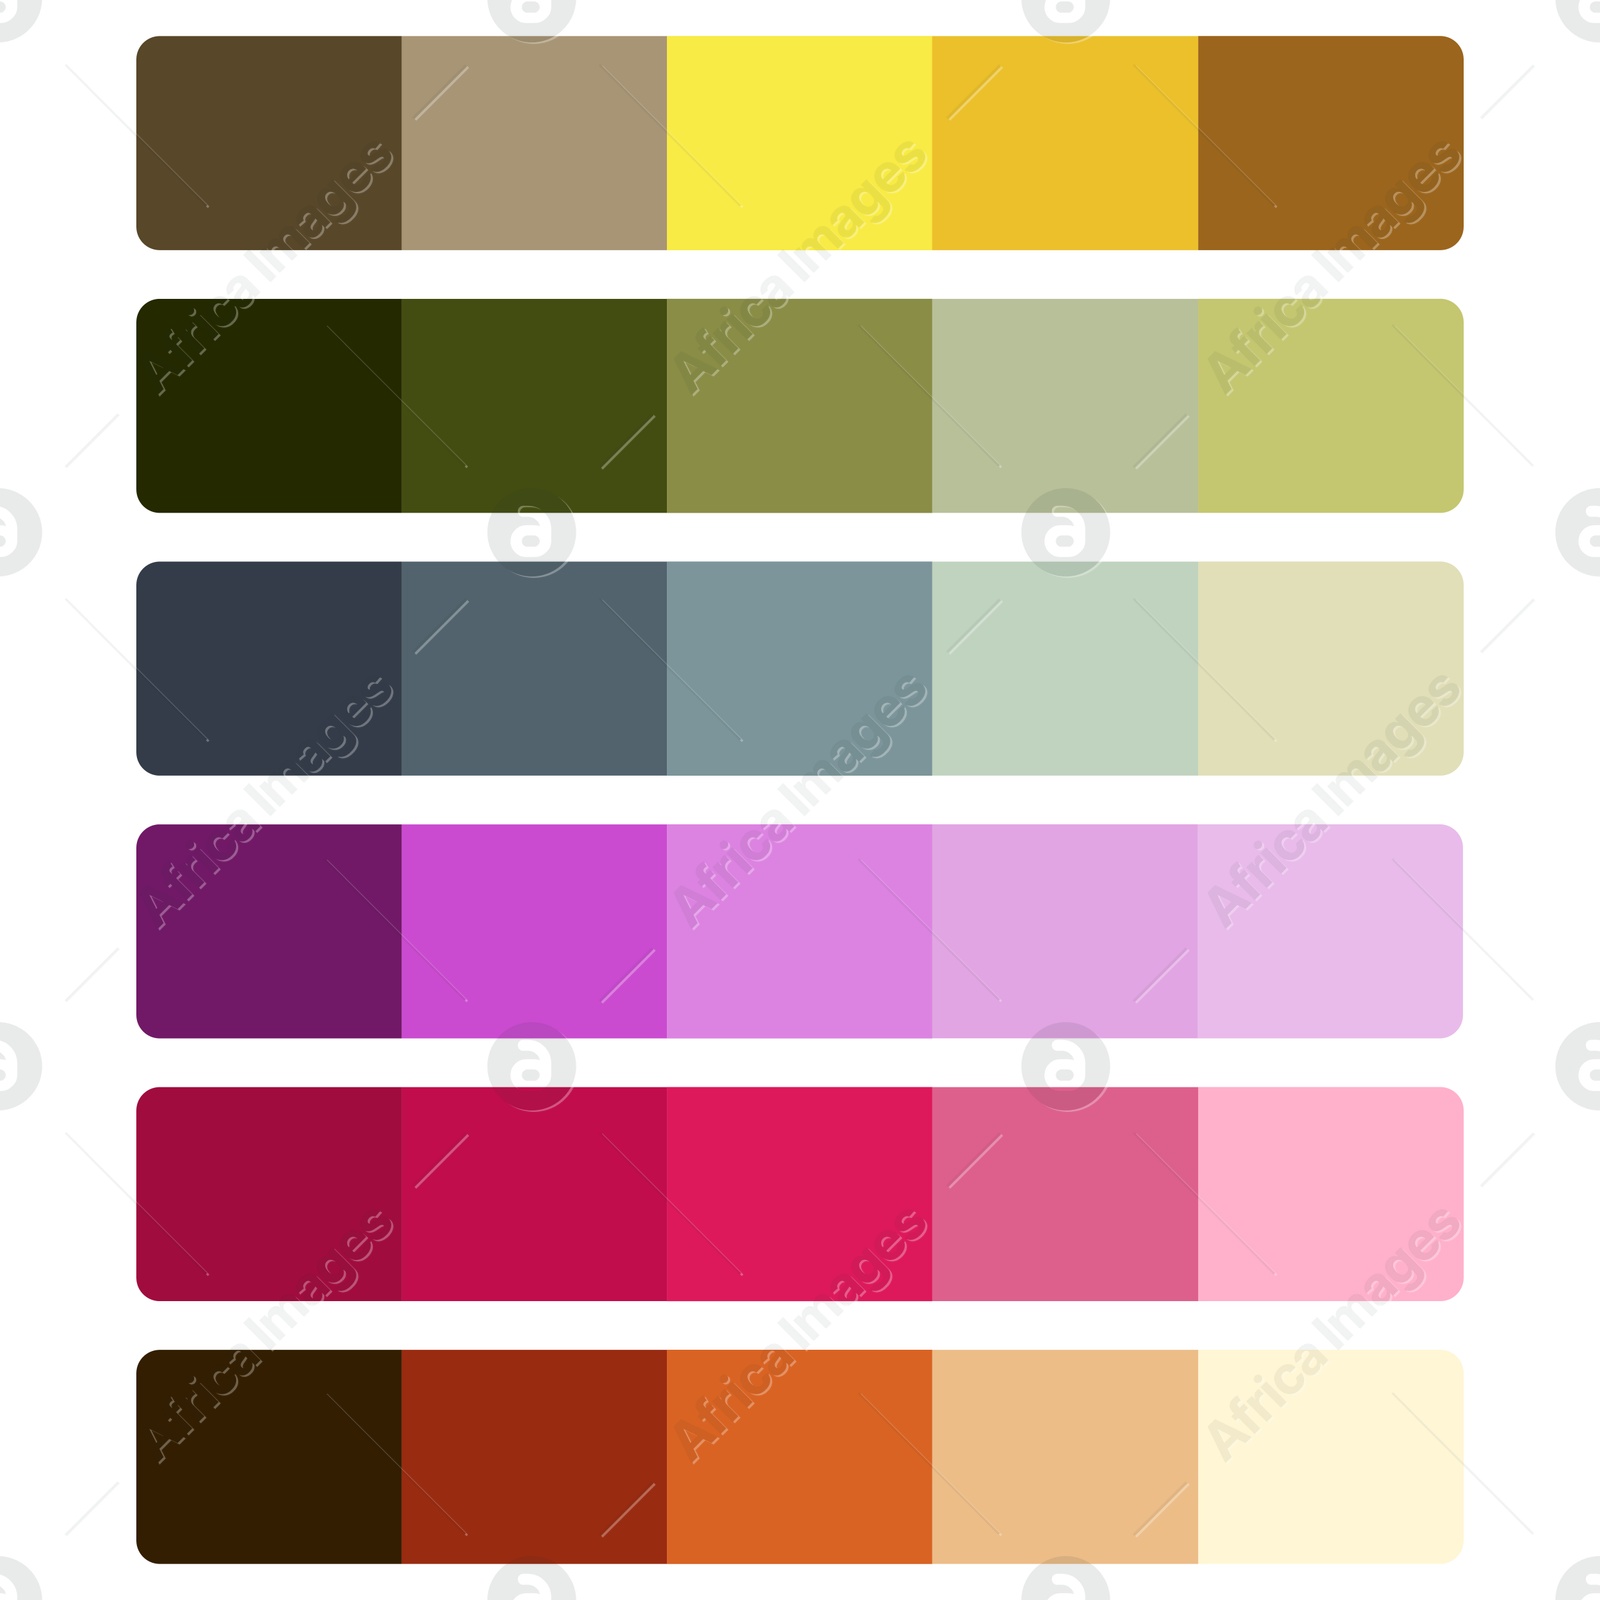 Illustration of Color palette with samples of different hues on white background